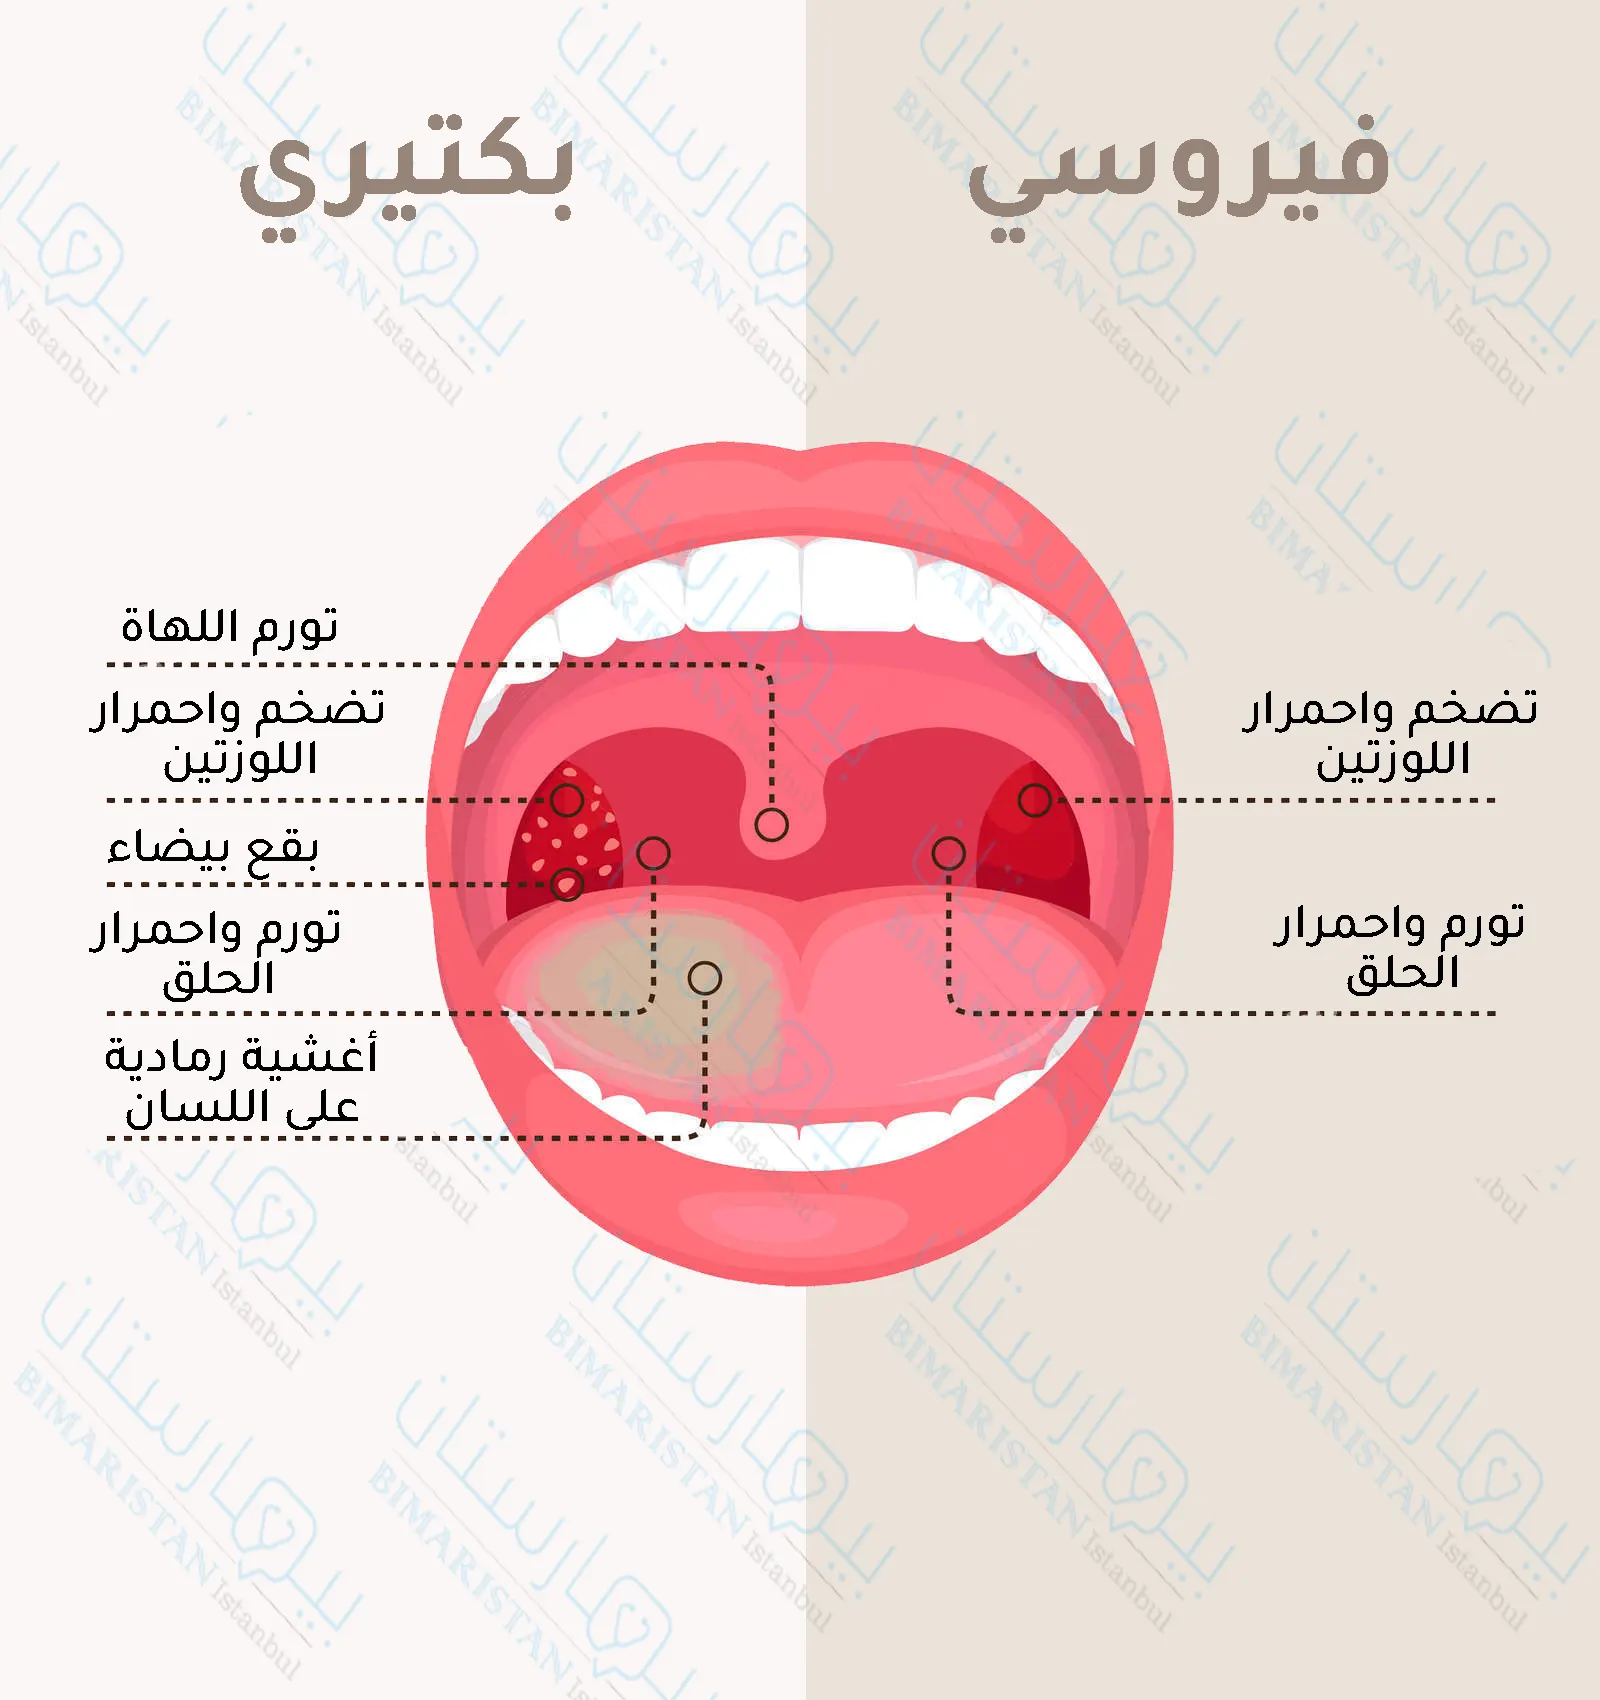 Causes of tonsillitis in children | The difference between bacterial tonsillitis and viral tonsillitis